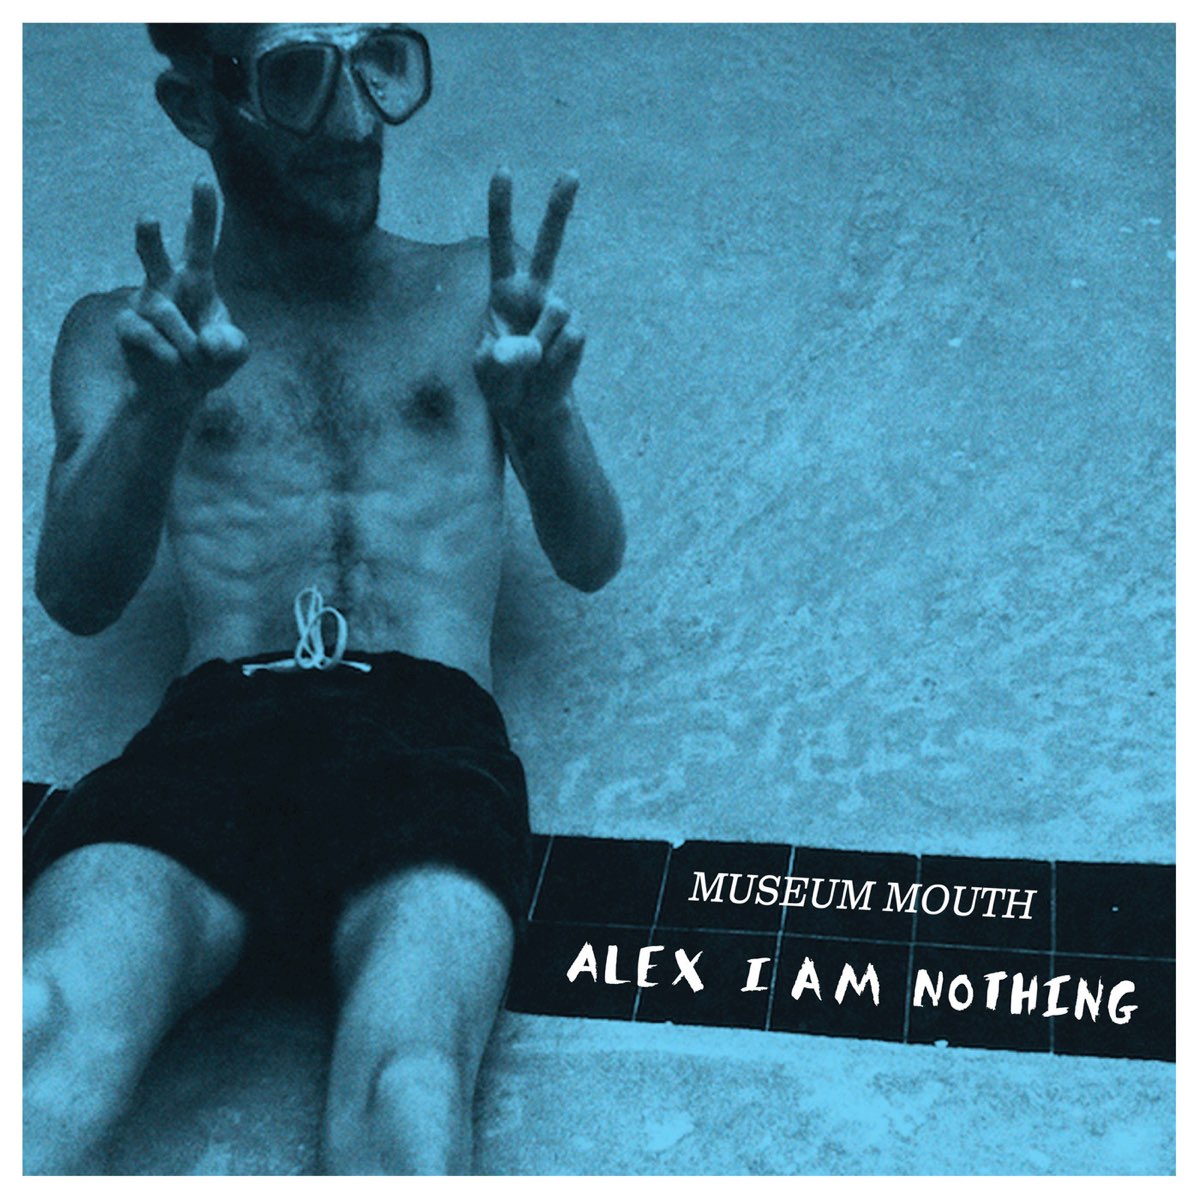 Alex i see you. I am nothing. Обложка альбома Alex c. Alex 1. The Museum of nothing..